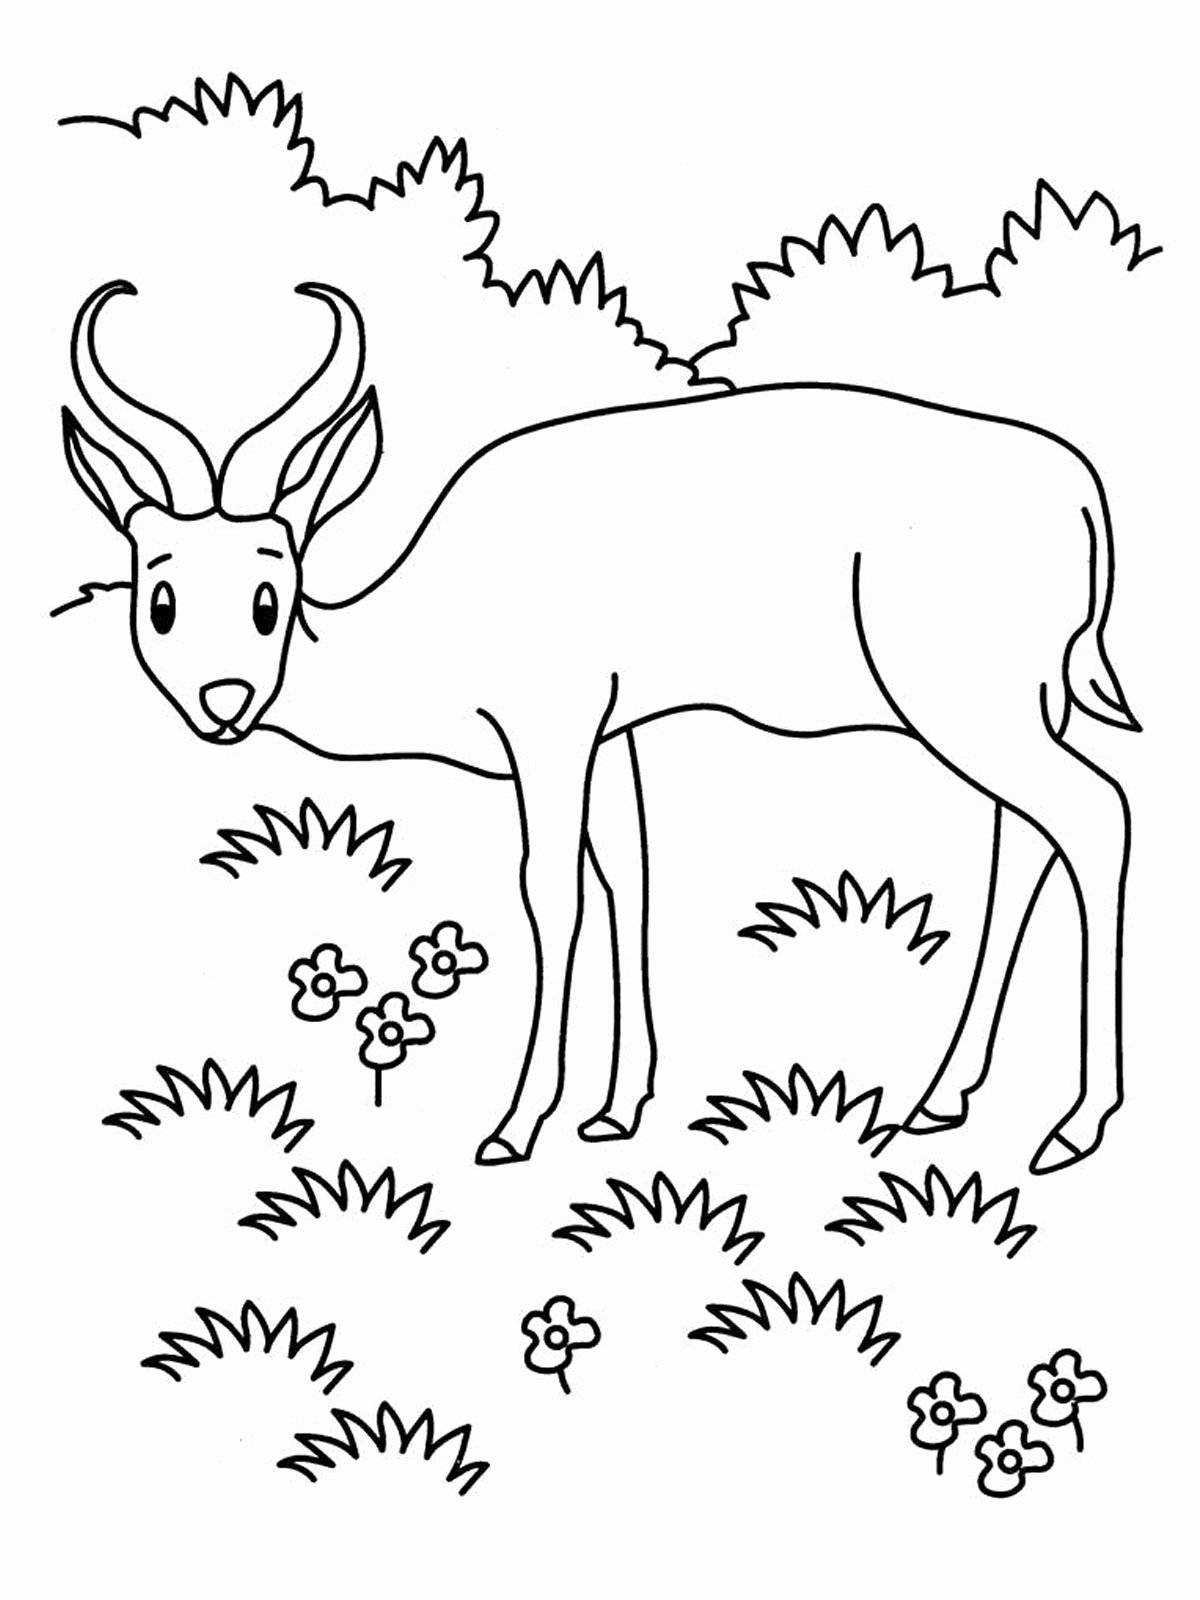 Coloring Pages Ecosystem Animals ...meriwetherfoundation.org